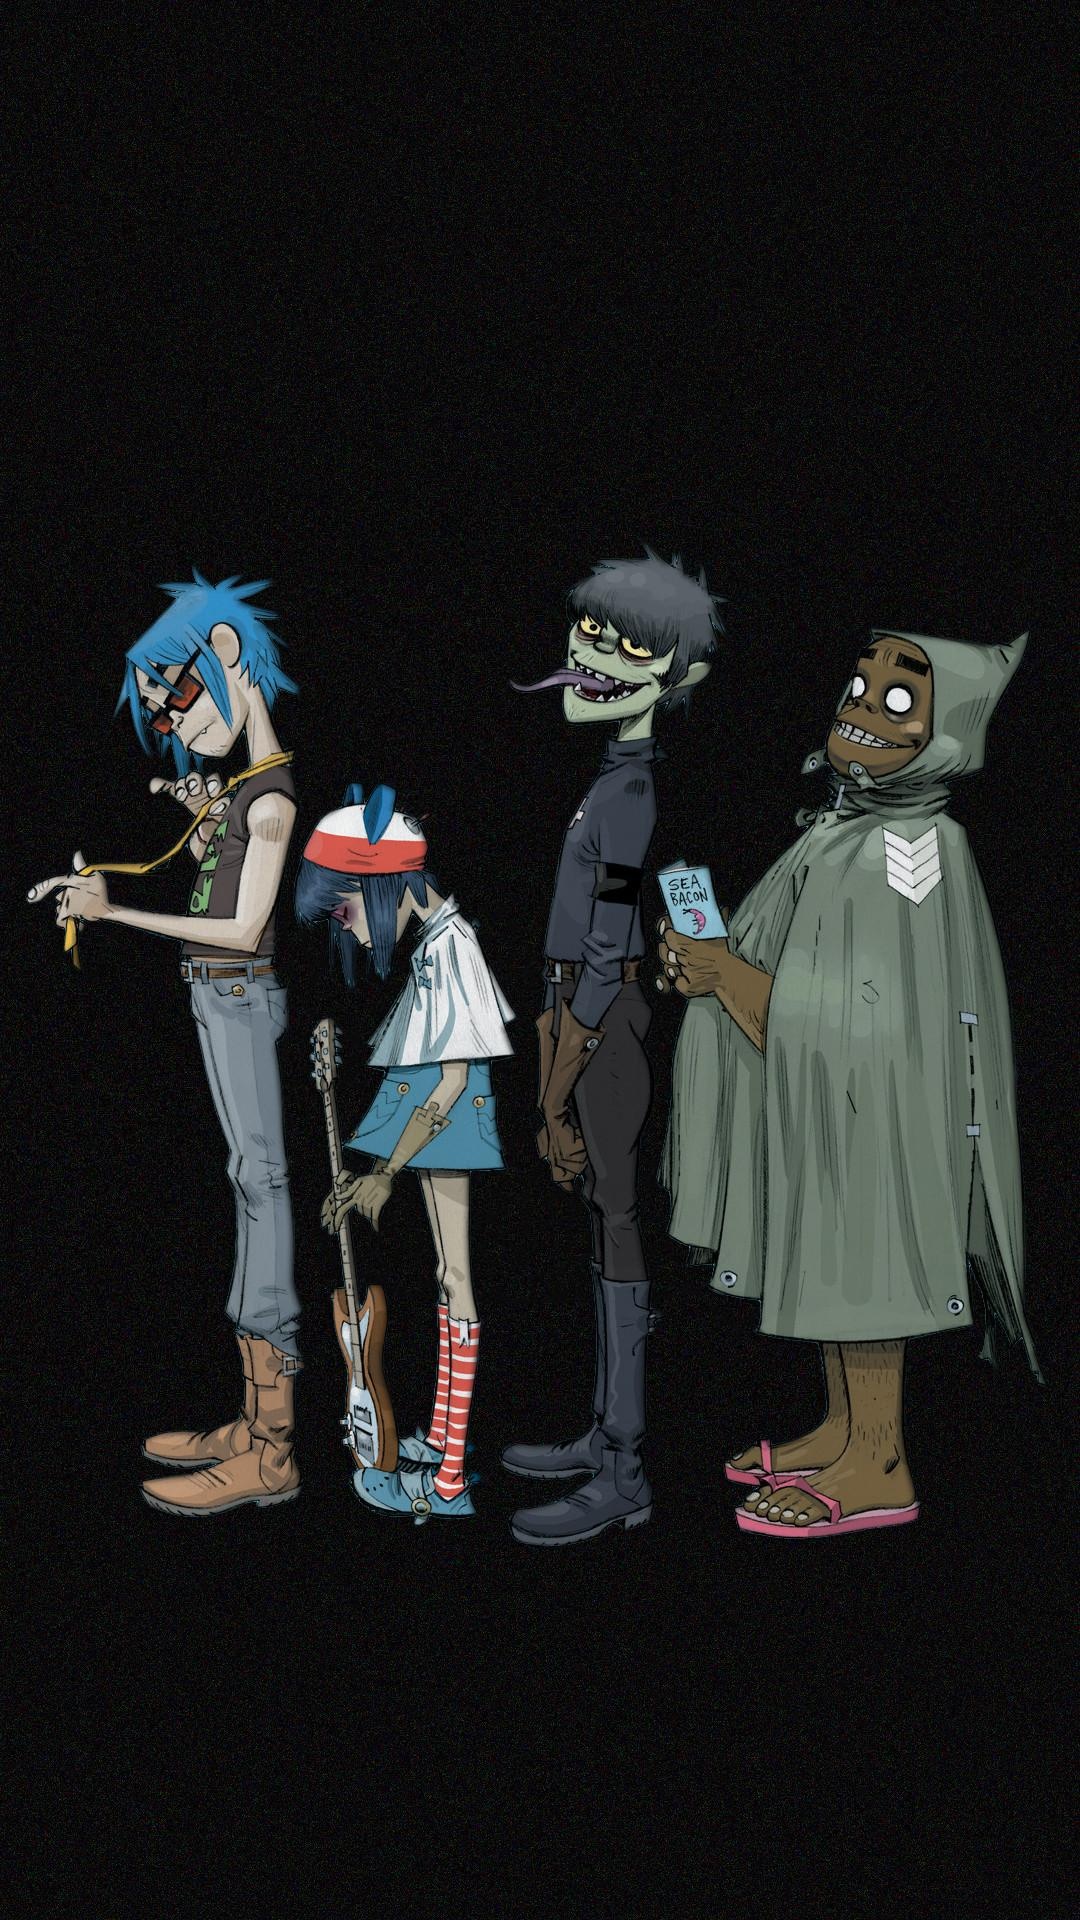 Gorillaz iphone wallpapers, Most popular, Beautiful backgrounds, Stunning wallpapers, 1080x1920 Full HD Phone